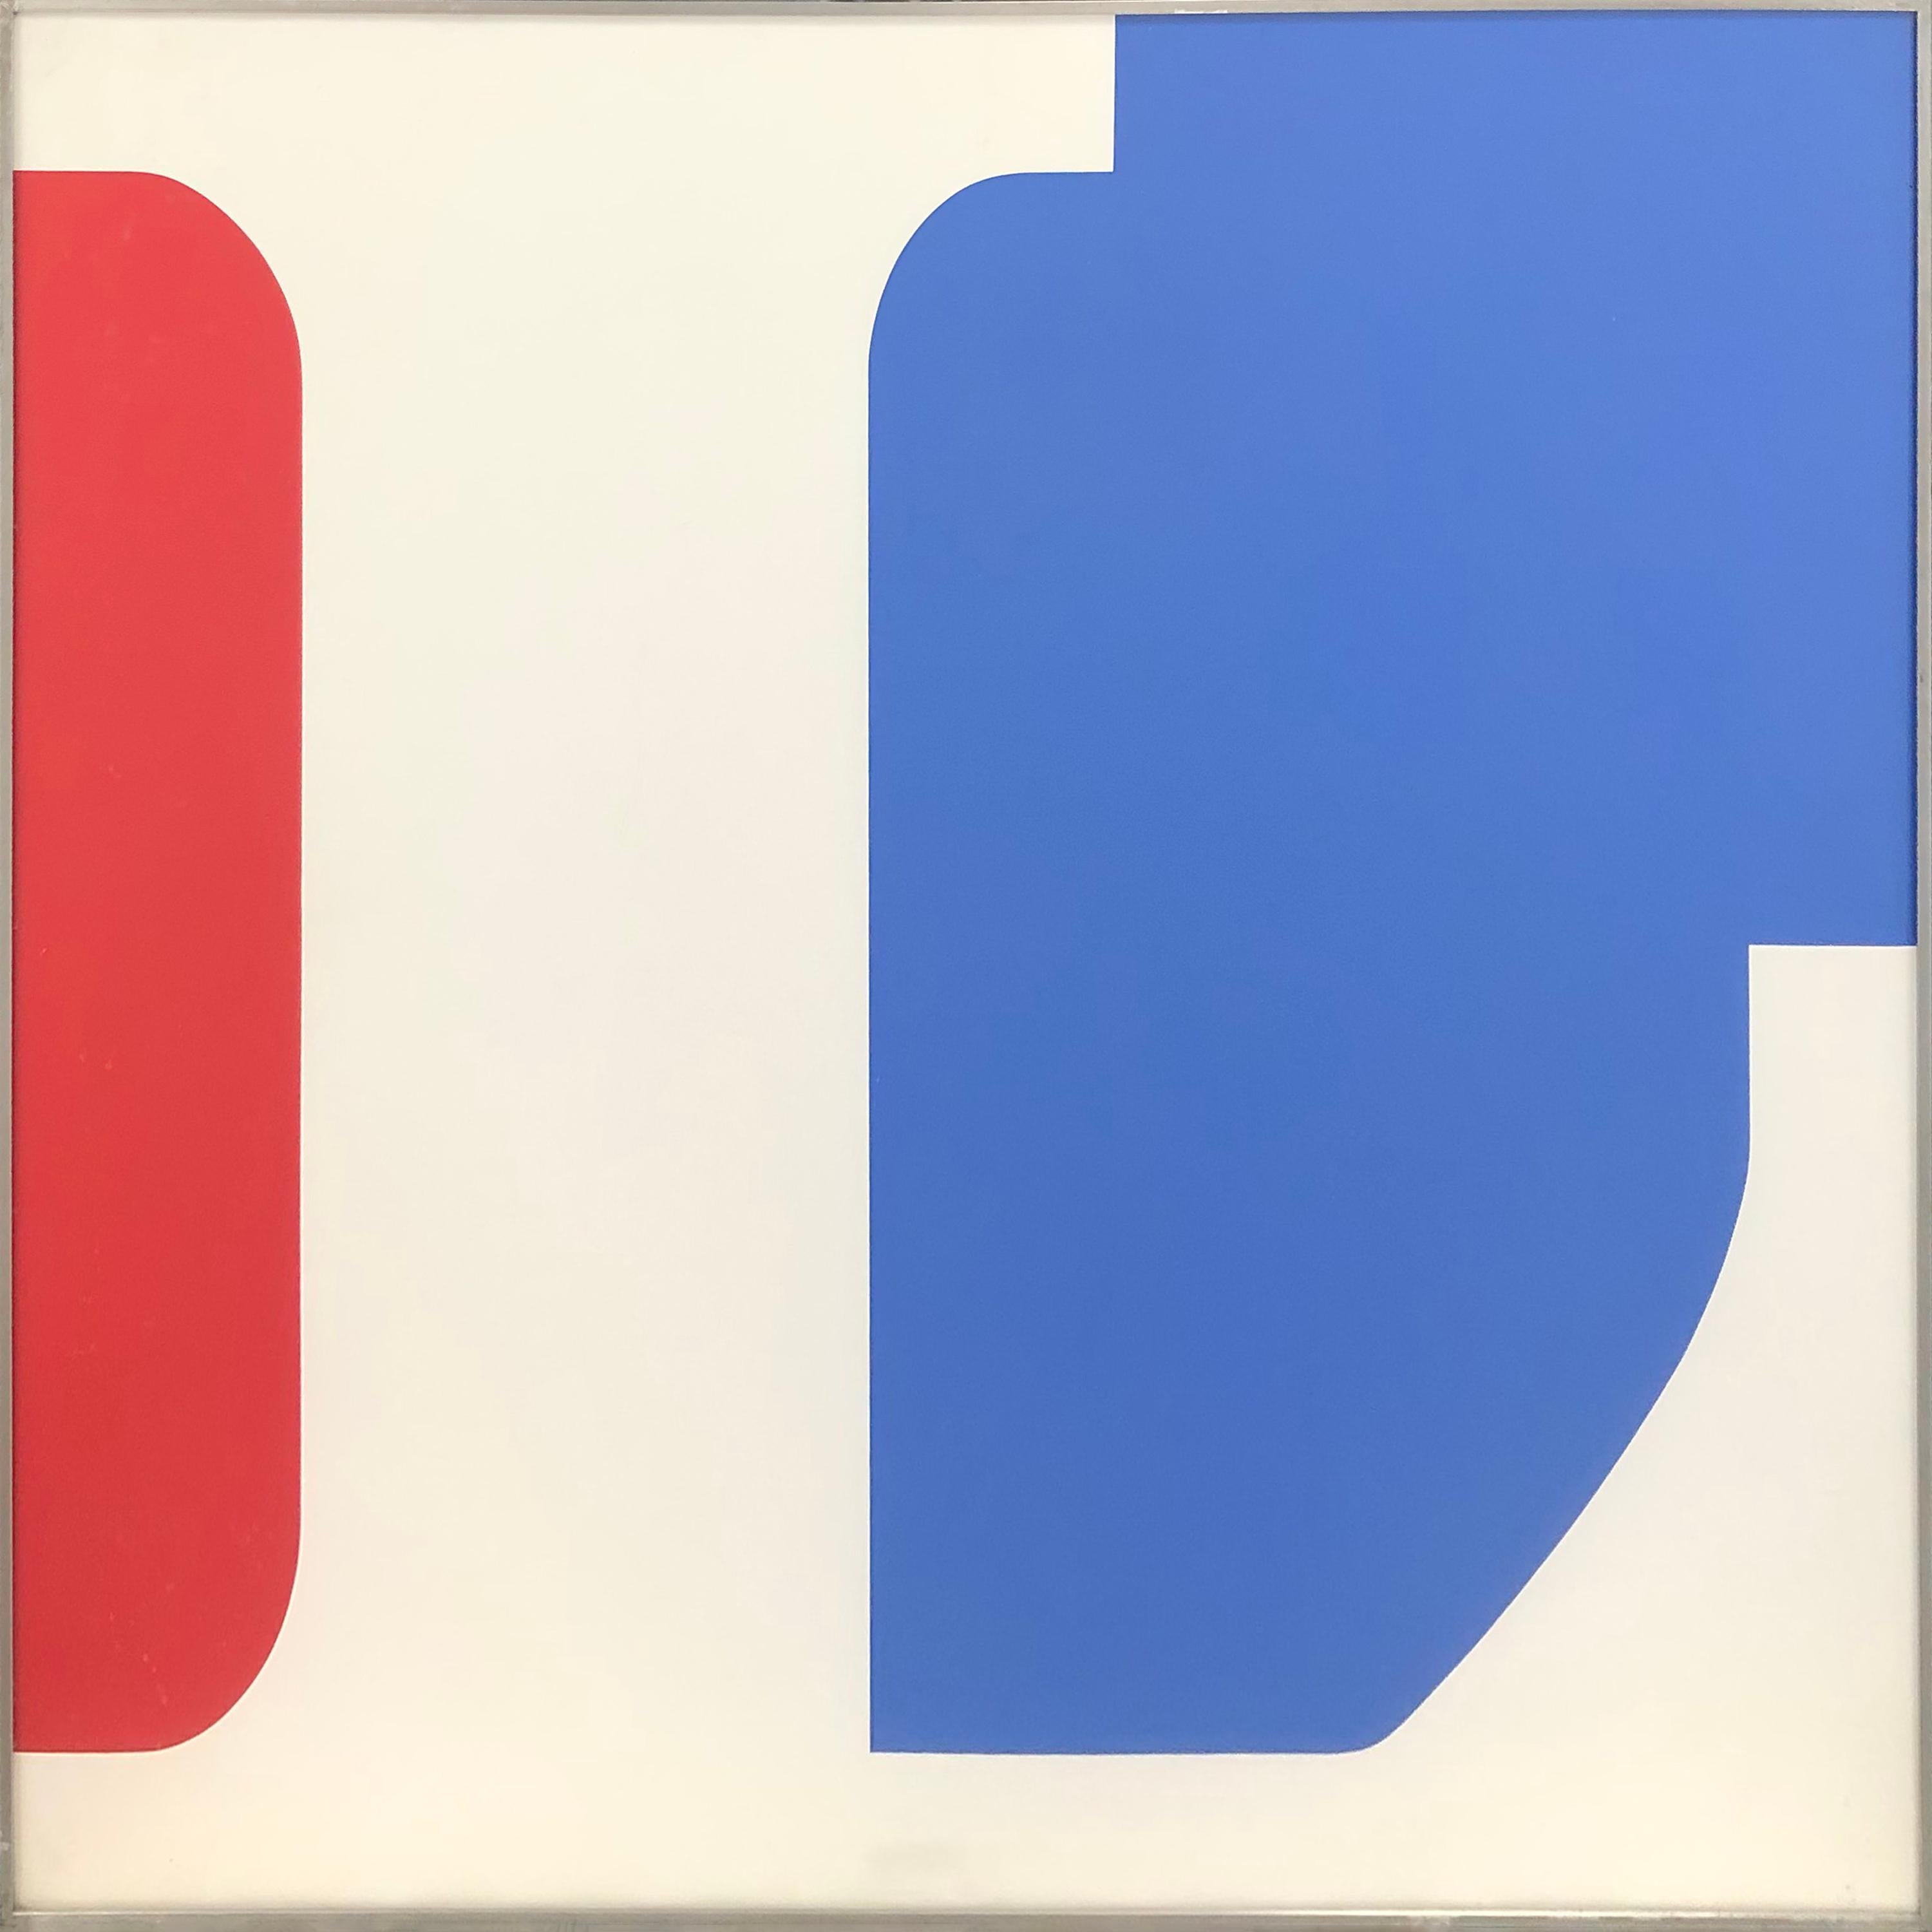 FOUR PANEL LOVE - Print by Robert Indiana